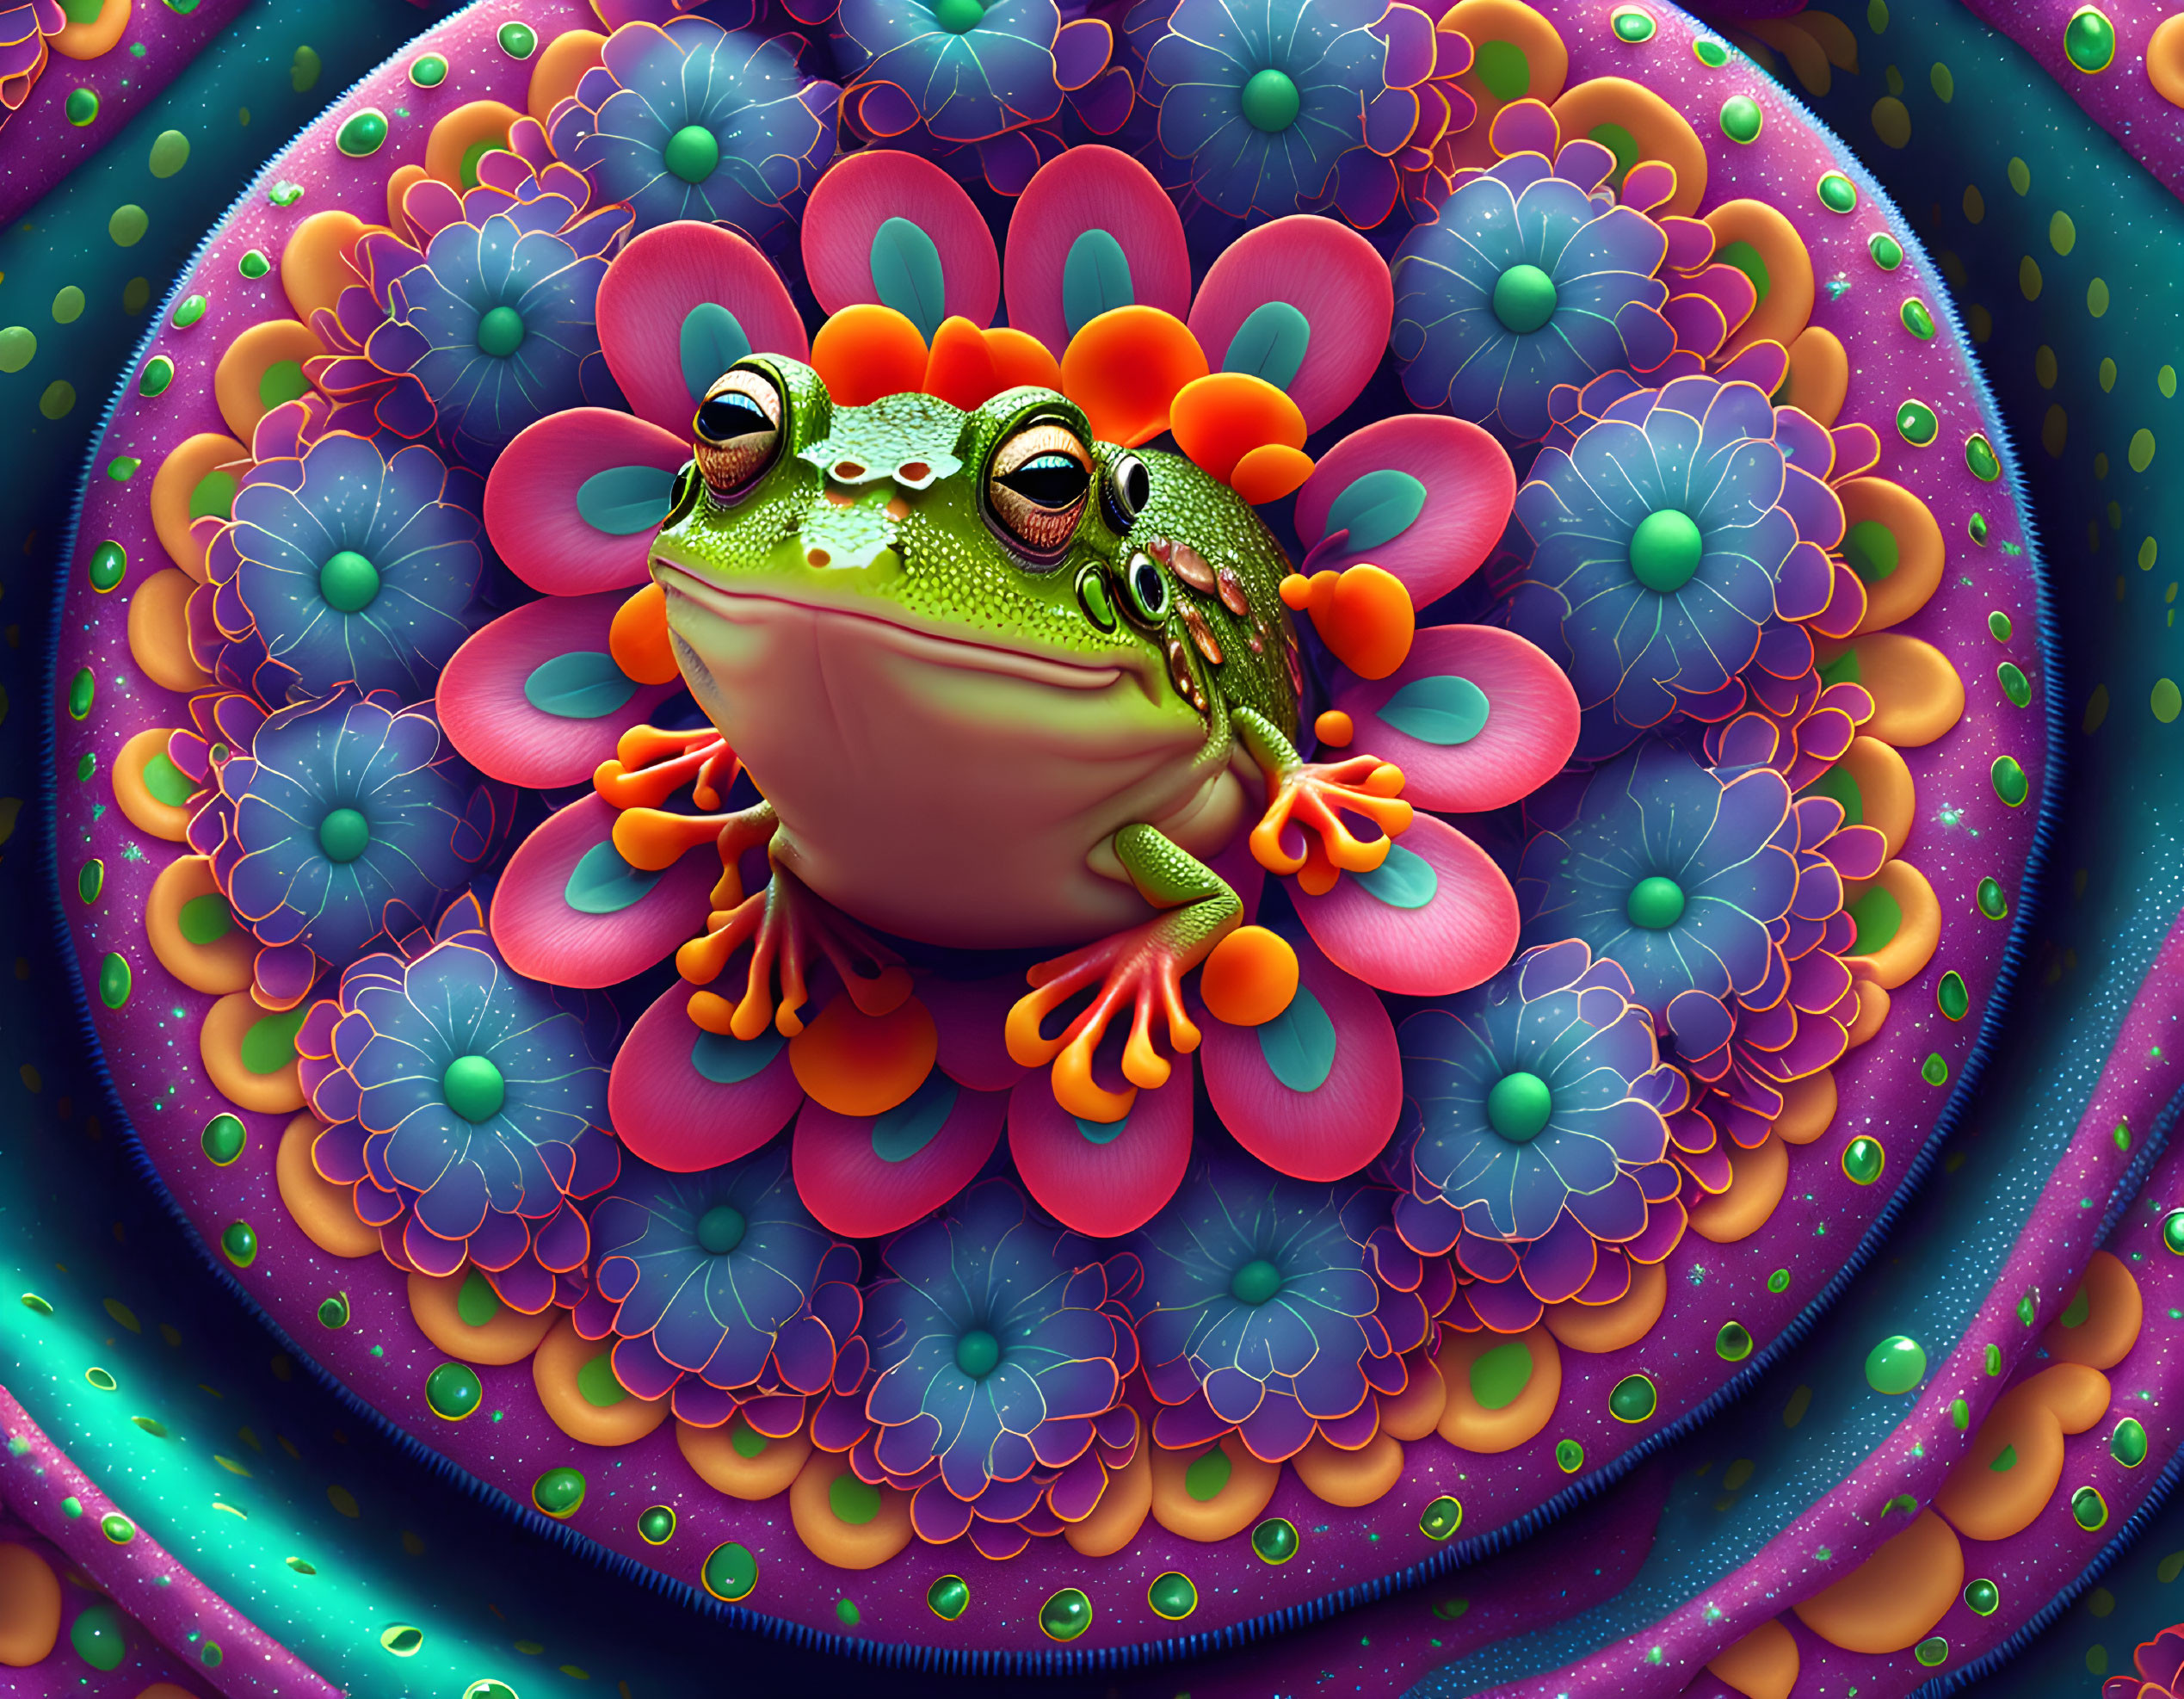 Colorful Whimsical Frog Surrounded by Psychedelic Flowers